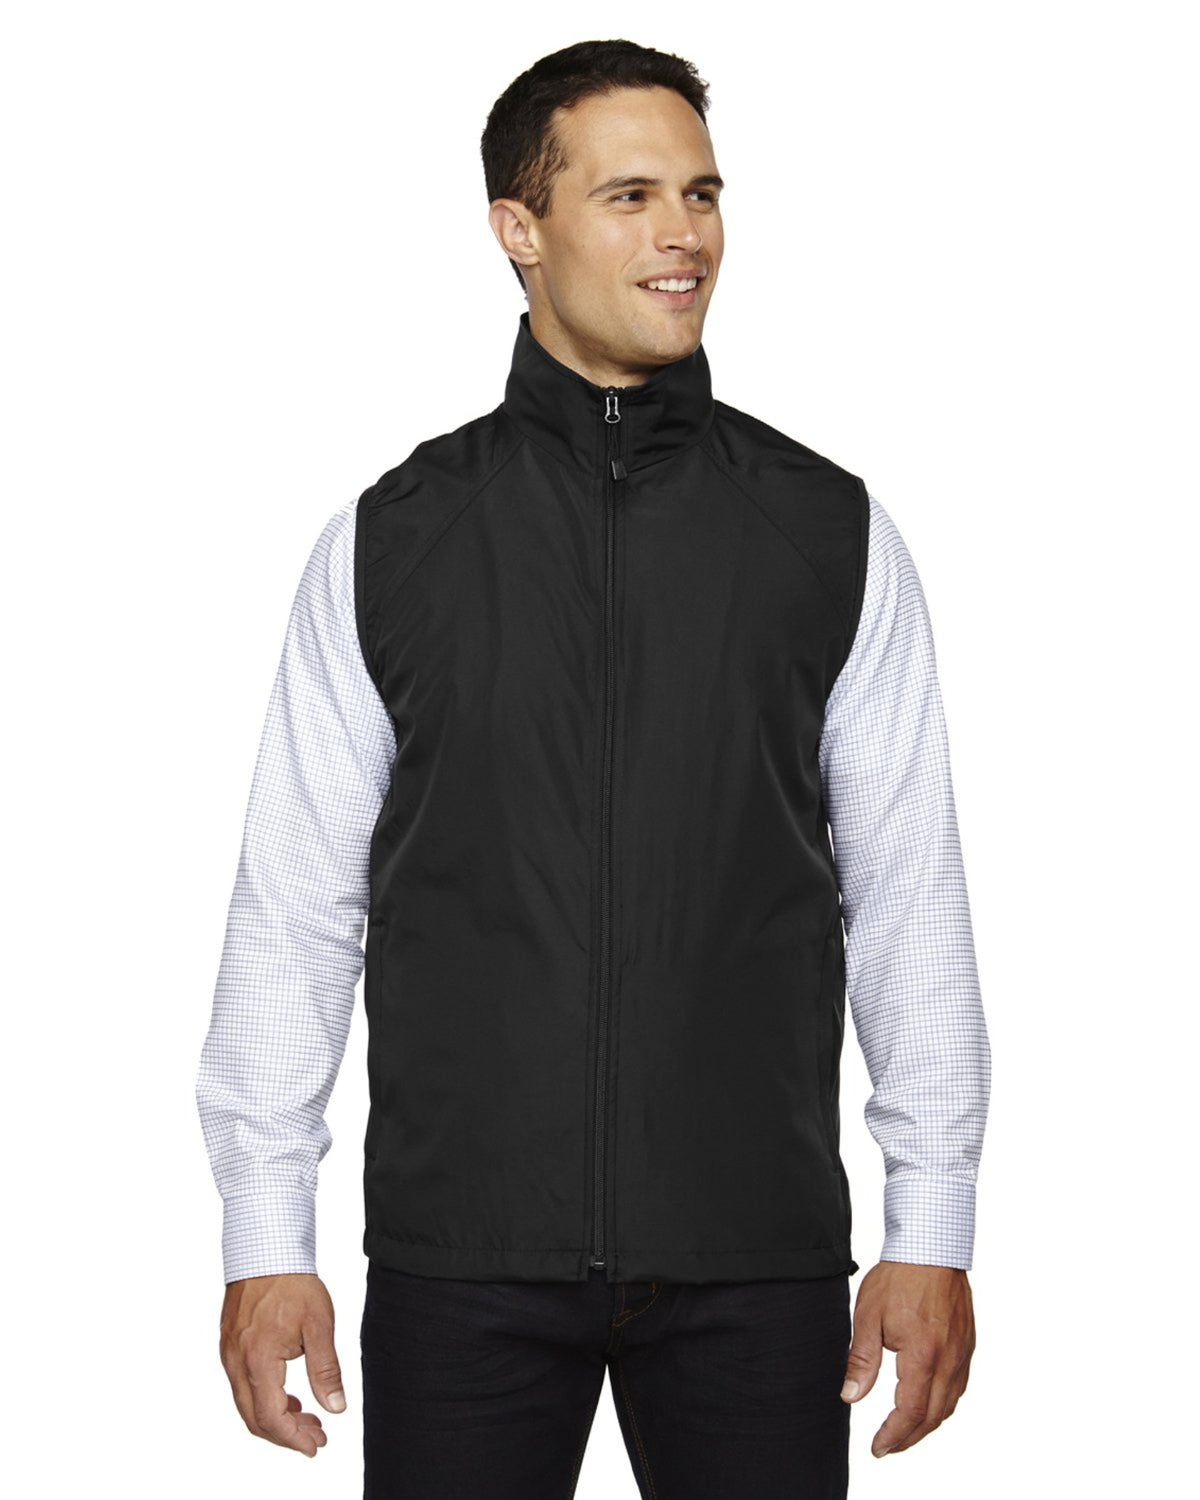 NORTH END MEN'S MICRO PLUS WINDSHIRT WITH TEFLON - ID Apparel